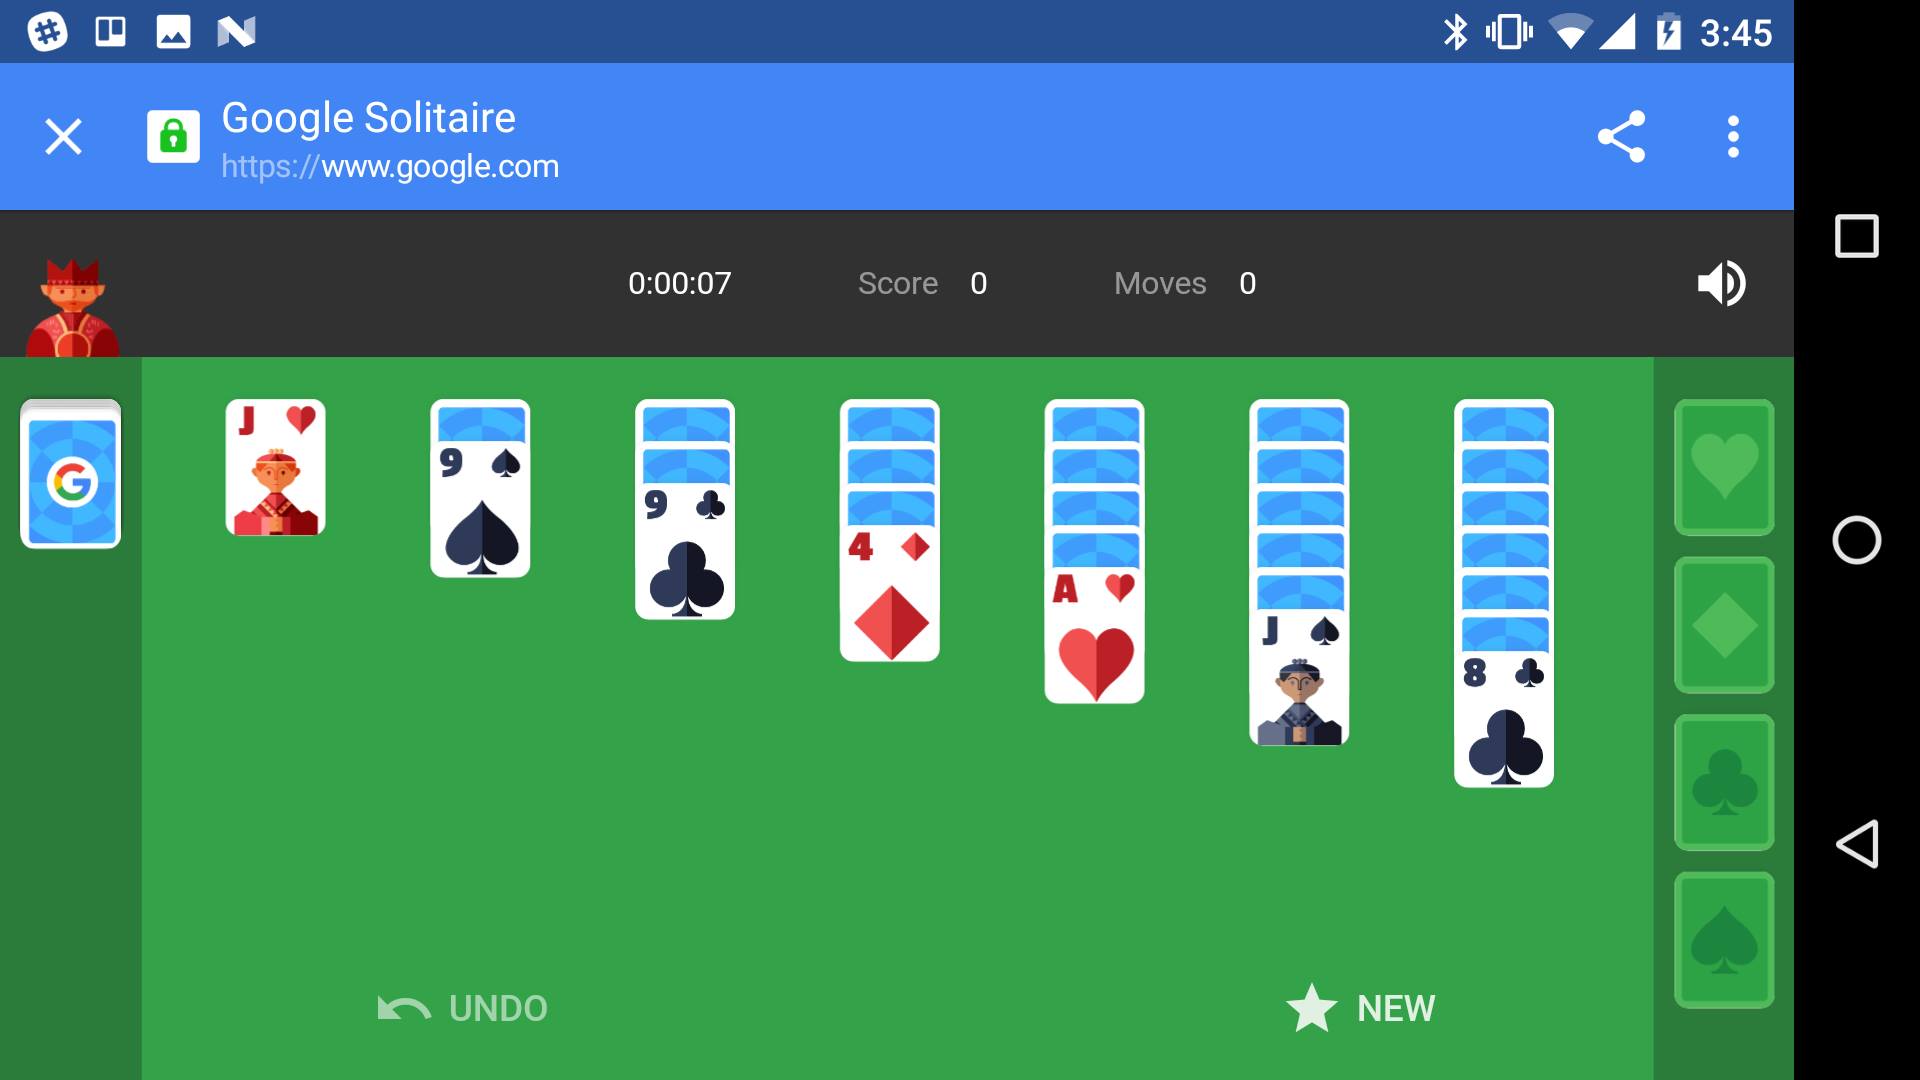 Solitaire 6 - Apps on Google Play